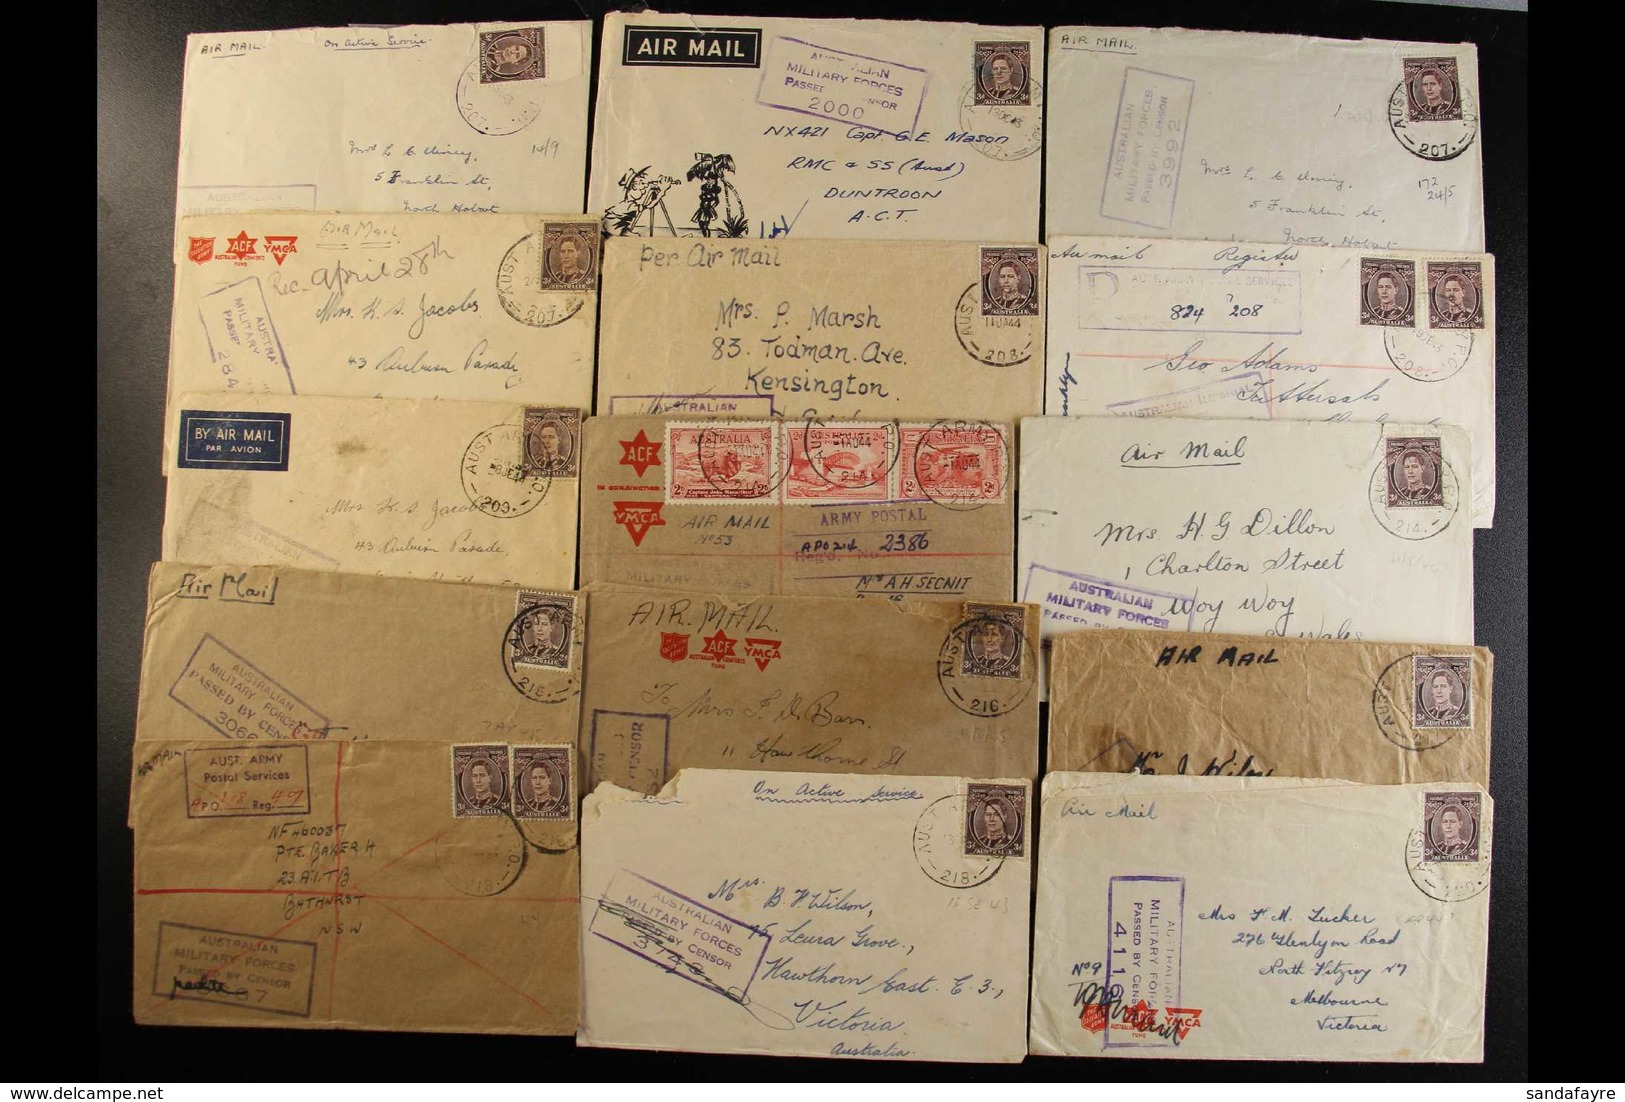 WW2 AUSTRALIAN FORCES - AUST ARMY DATESTAMPS  A Fine Collection Of Covers Back To Australia, Bearing Australian KGVI Sta - Papua New Guinea